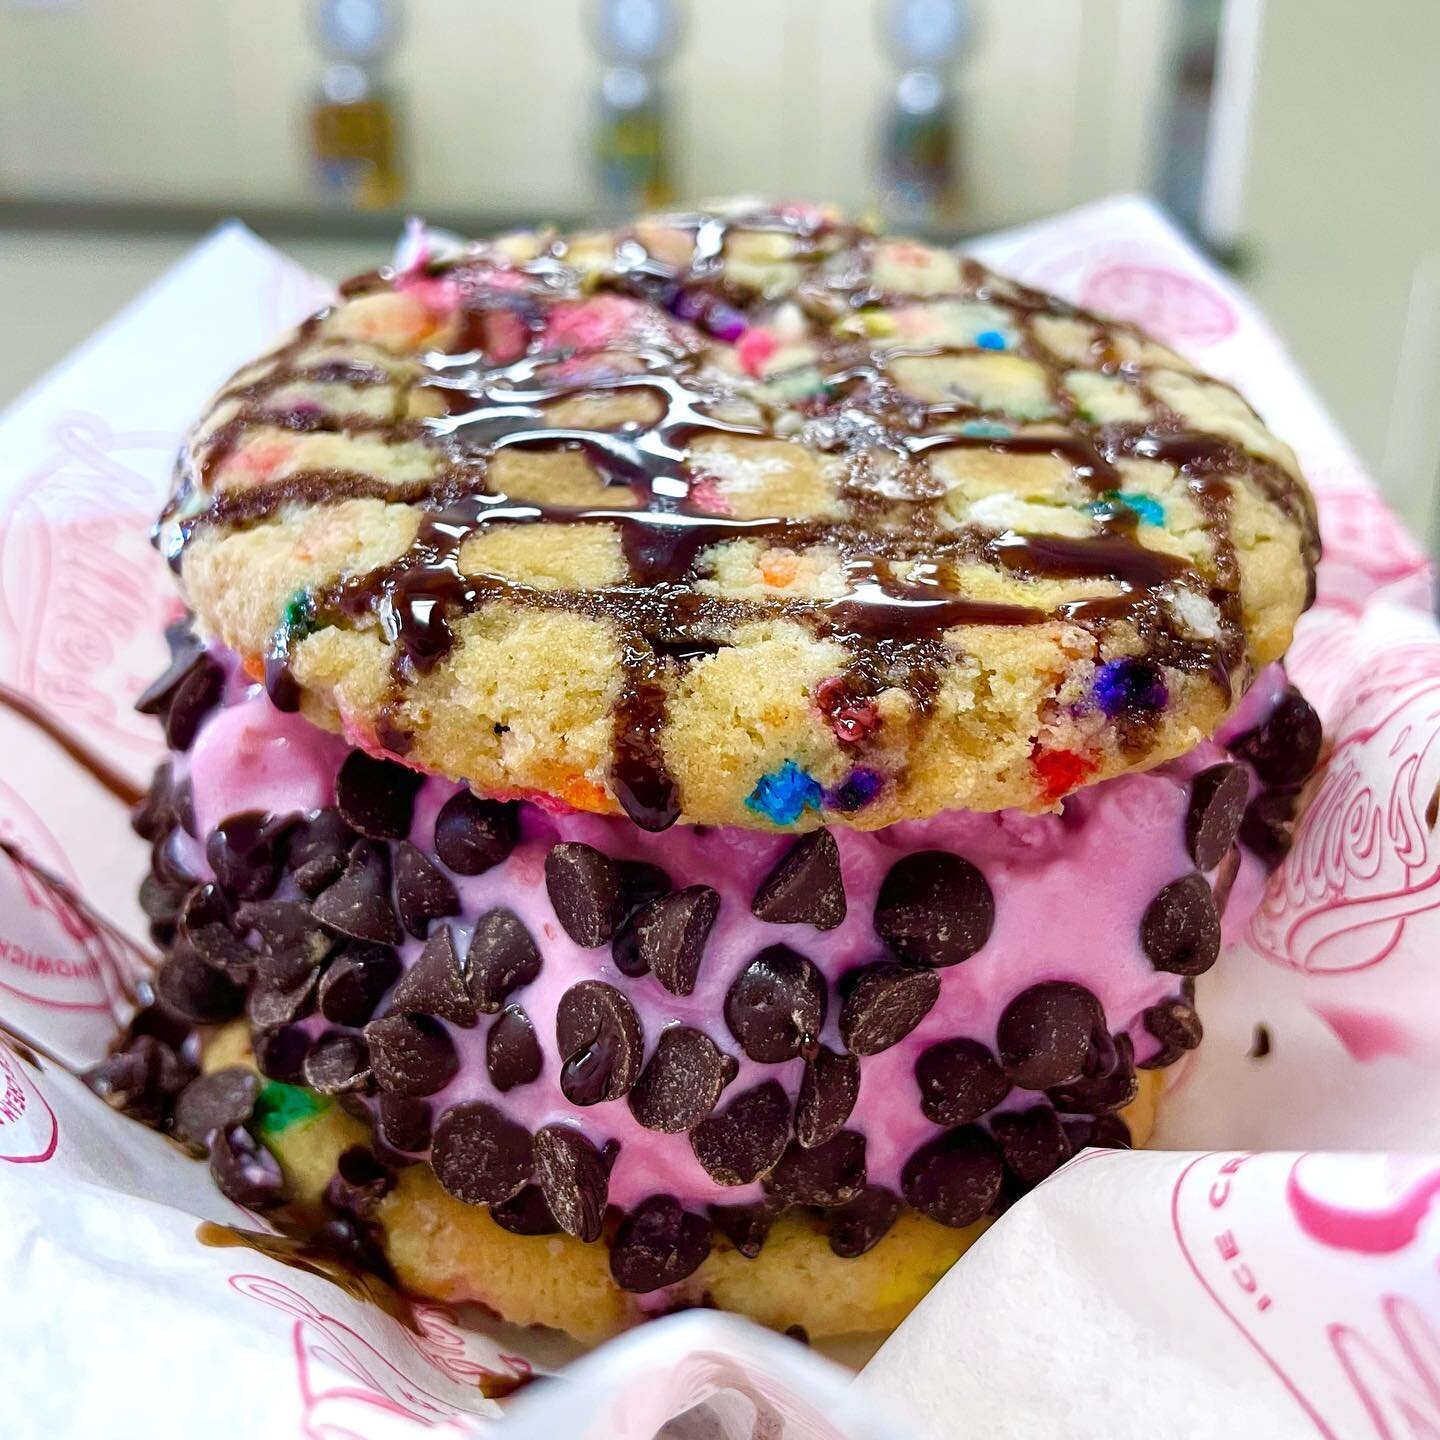 If our math is right&hellip; with 7 cookie options (mix and match top and bottom), 22 ice cream flavors, and 4 topping options, there are 4,312 total combinations for cookie sandwiches. What will your custom combo be?! #isthatmathright? #theydidthema